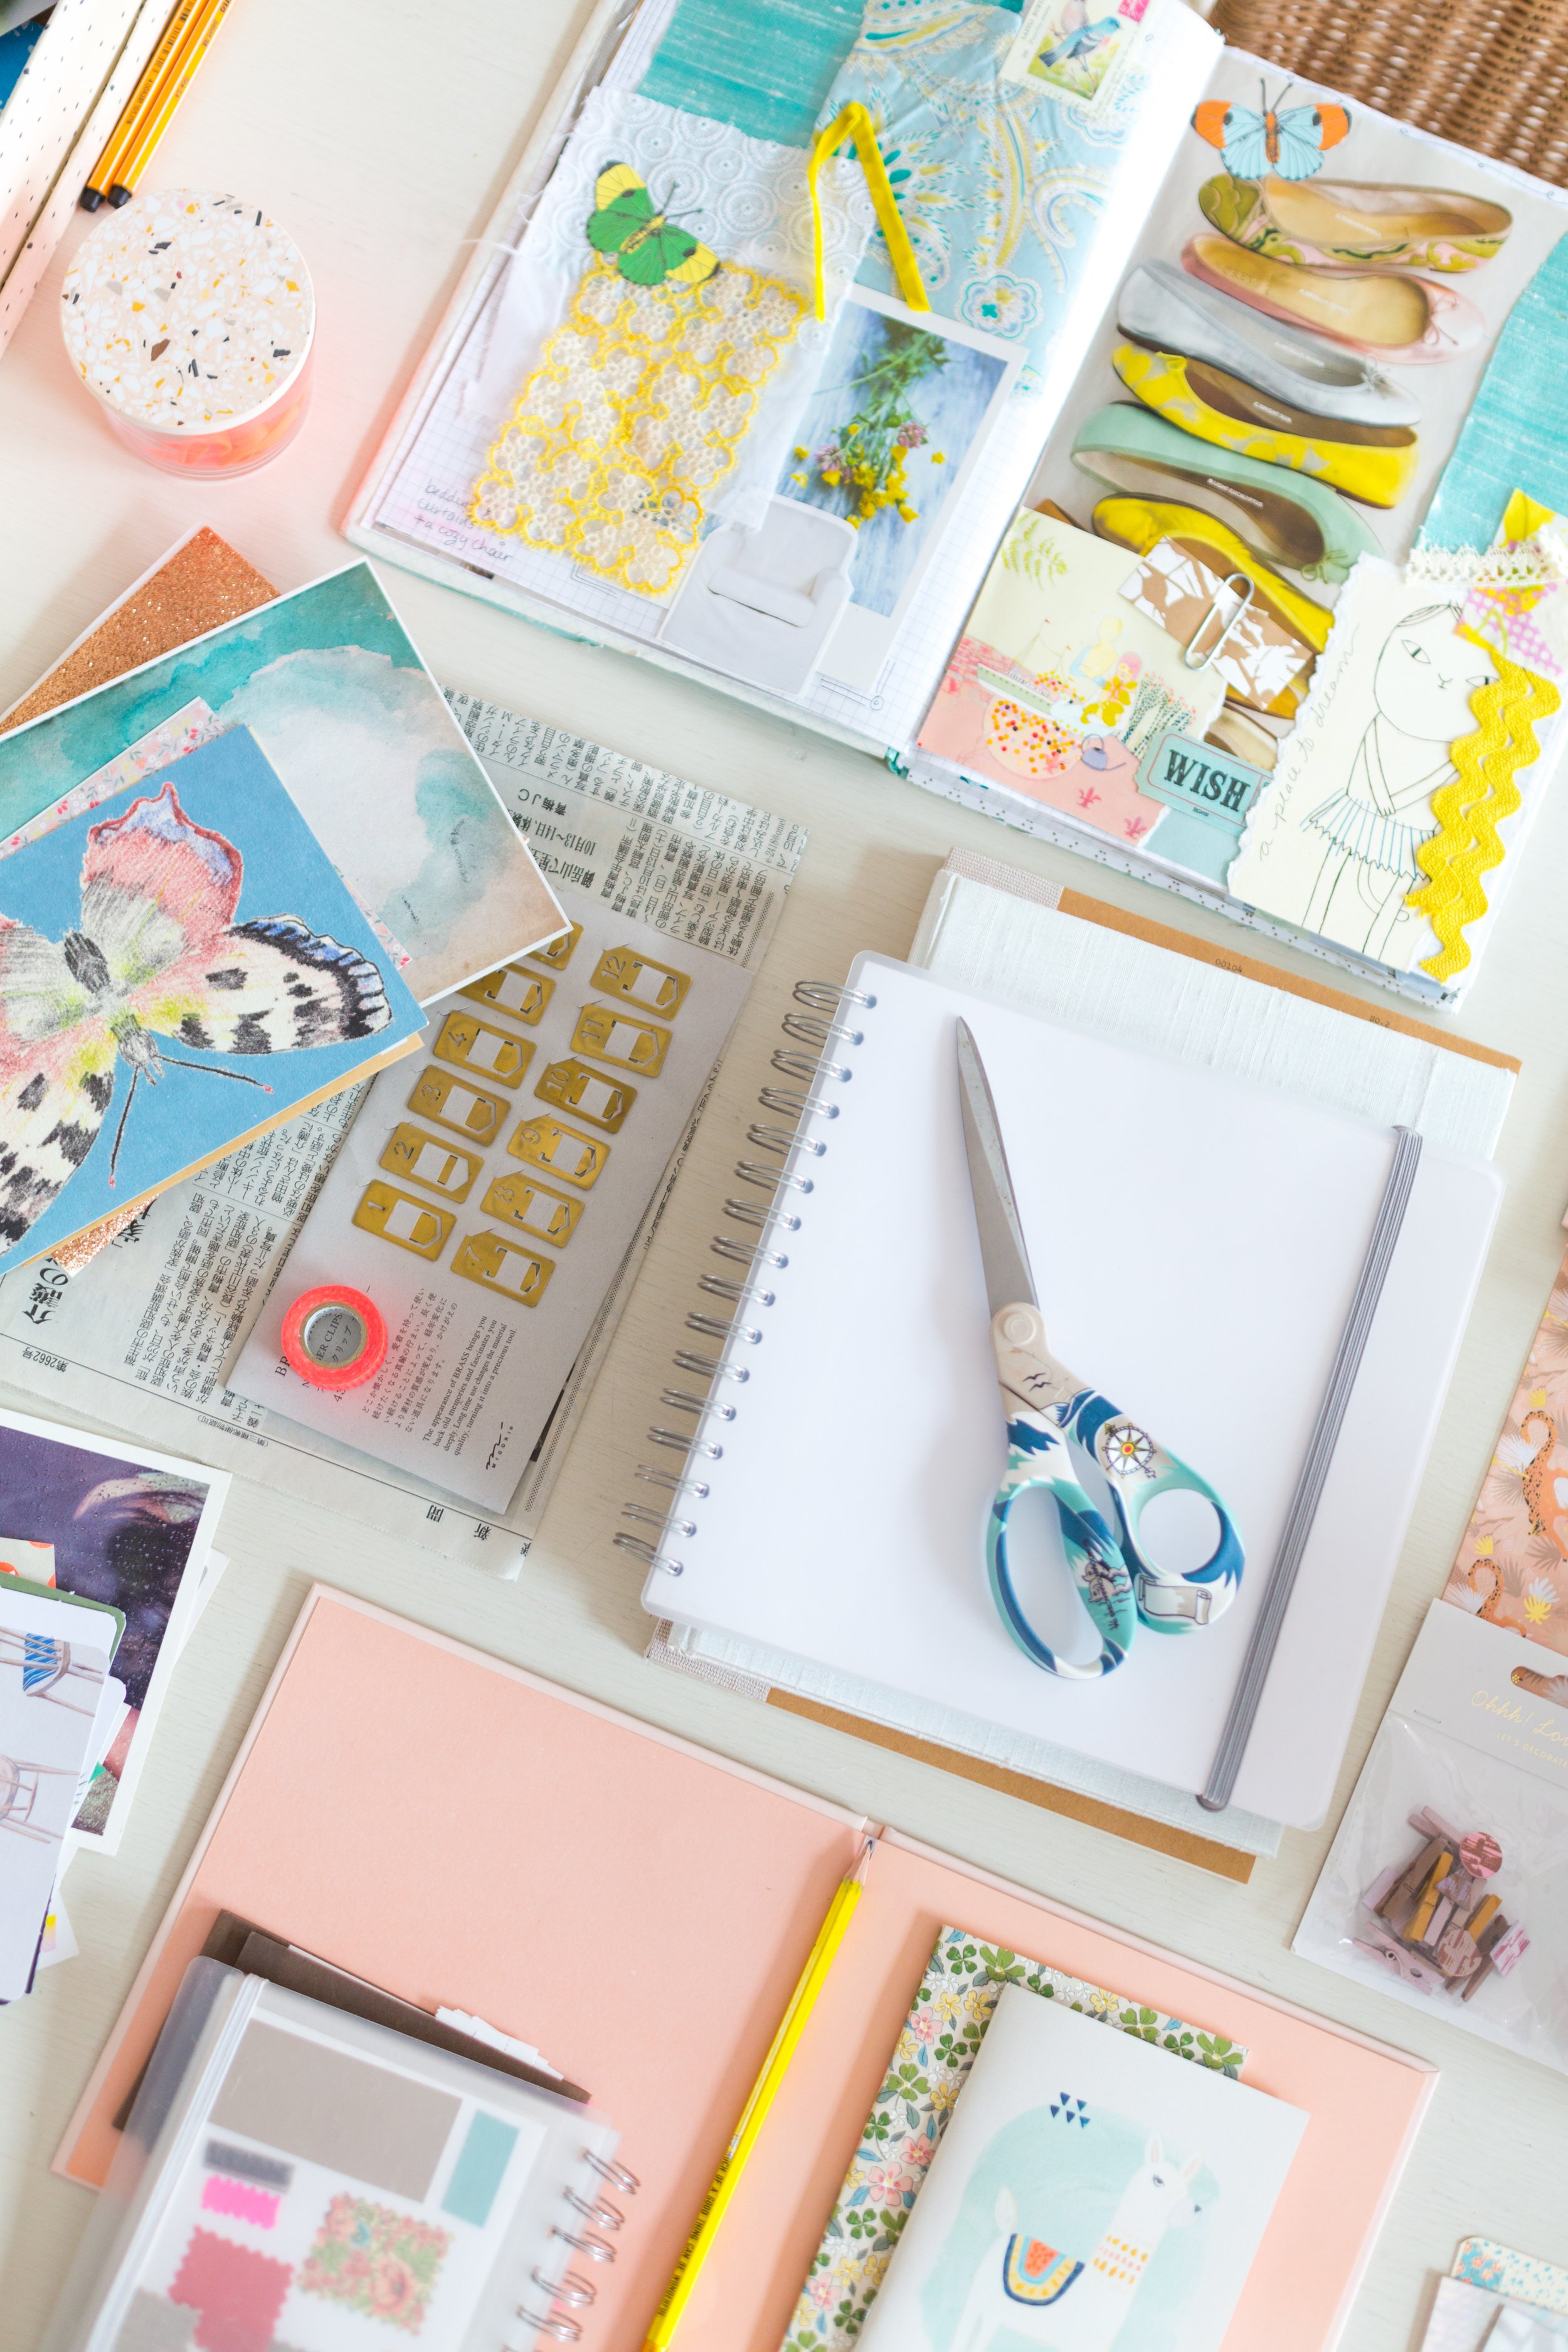 Unveiling the Magic: The Remarkable Benefits of Art Journaling